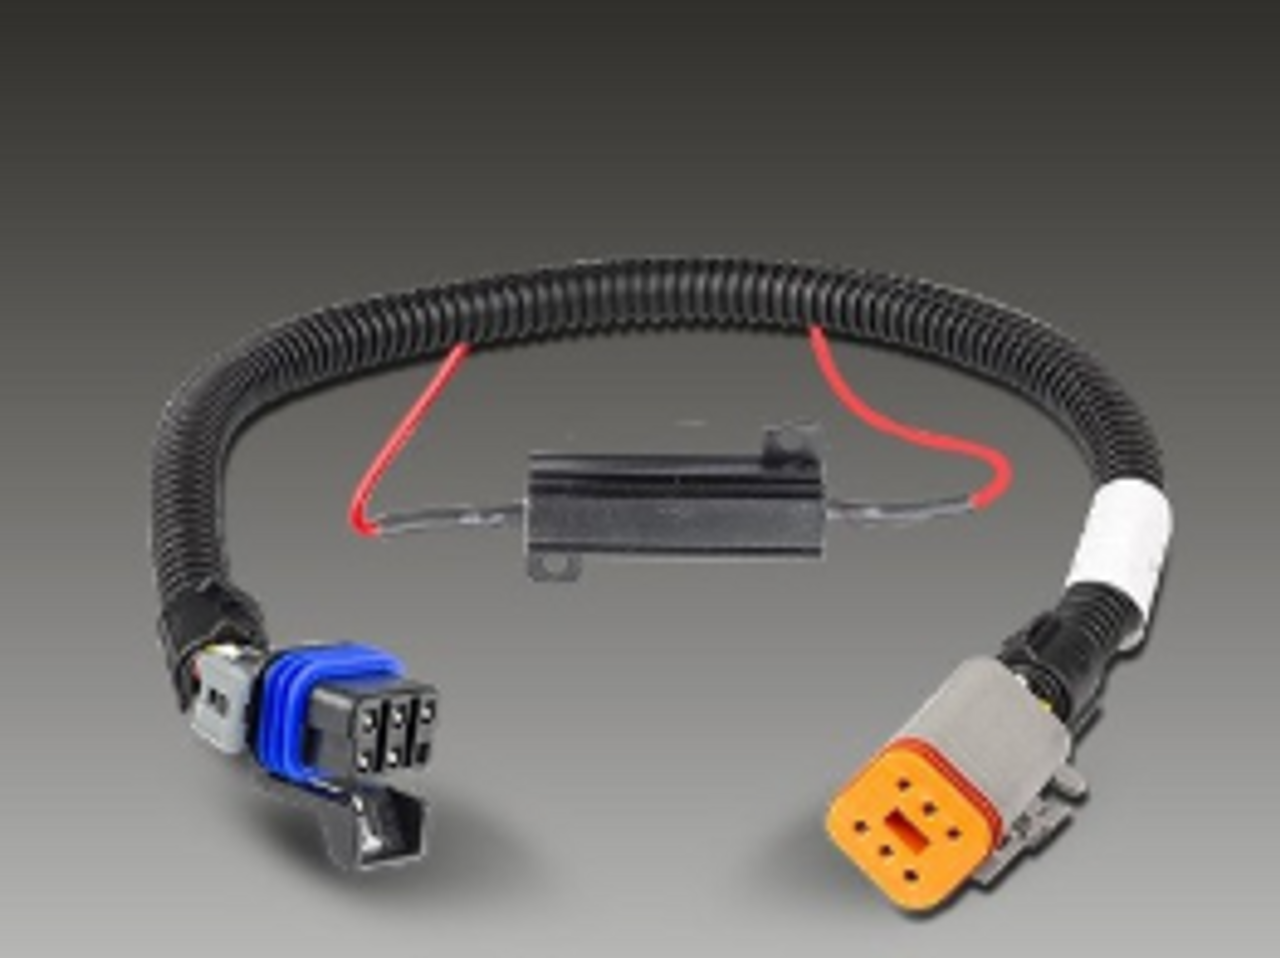 SO282ARWM2LR450+PATCHCOLORADO - Colorado Patch Cable System. Plug and Play. Easy LED Upgrade. Stop, Tail, Indicator and Reverse. Lamp with Conversion Cable, Plug. Prewired Lamp and Patch Lead to Vehicle Loom. Application to Suit Holden Colorado. Autolamp. Ultimate LED. 